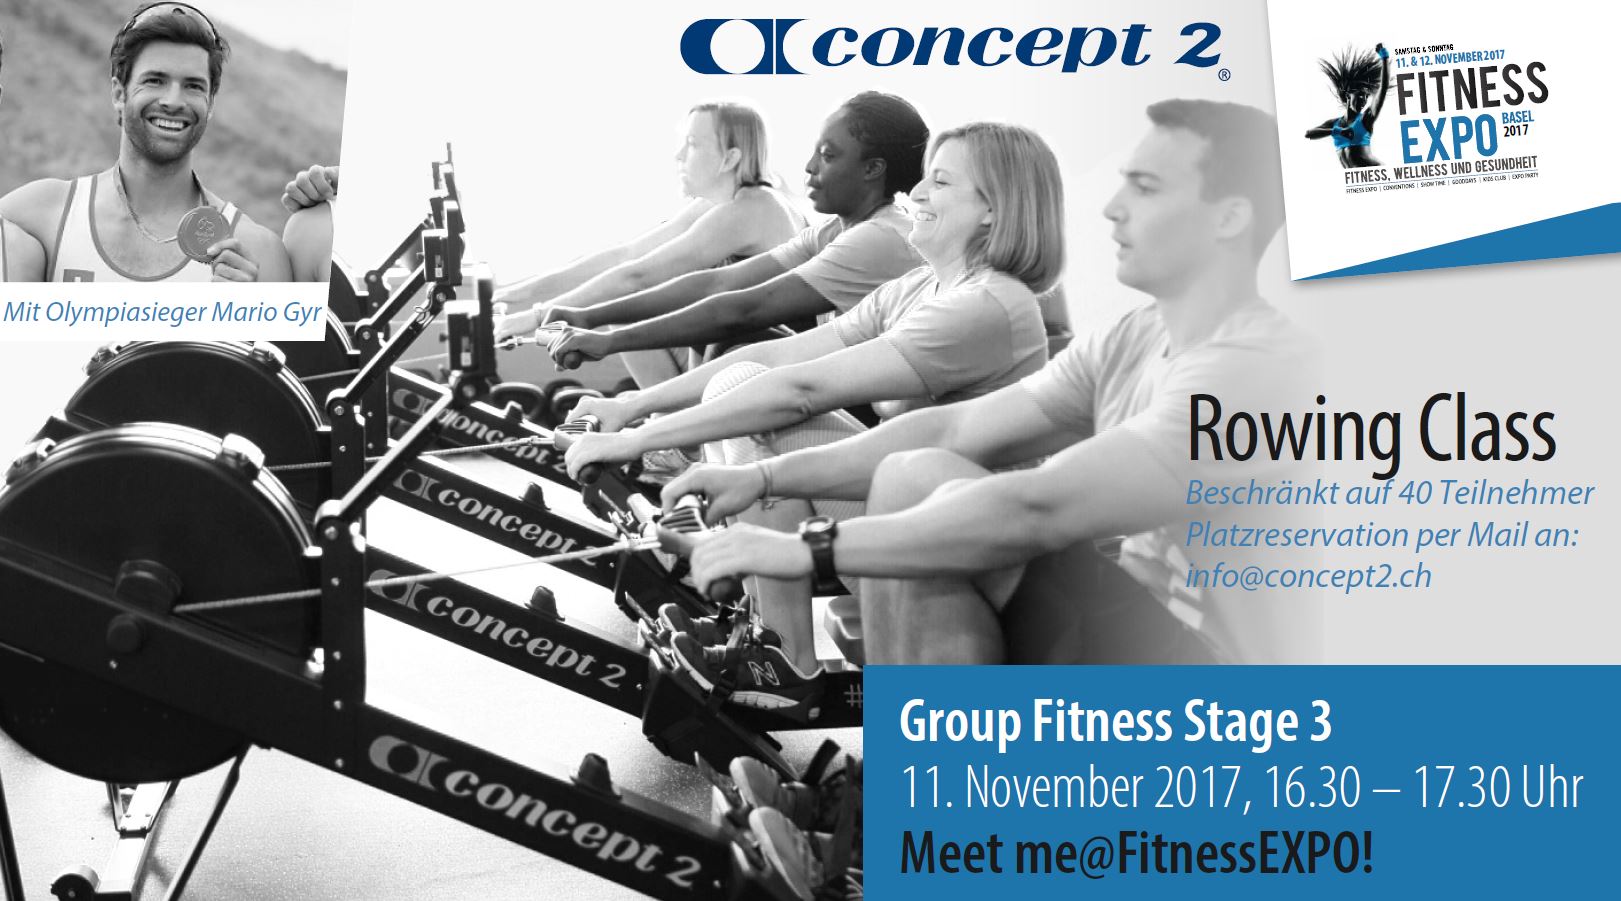 Fitness Expo concept2 Rowing class